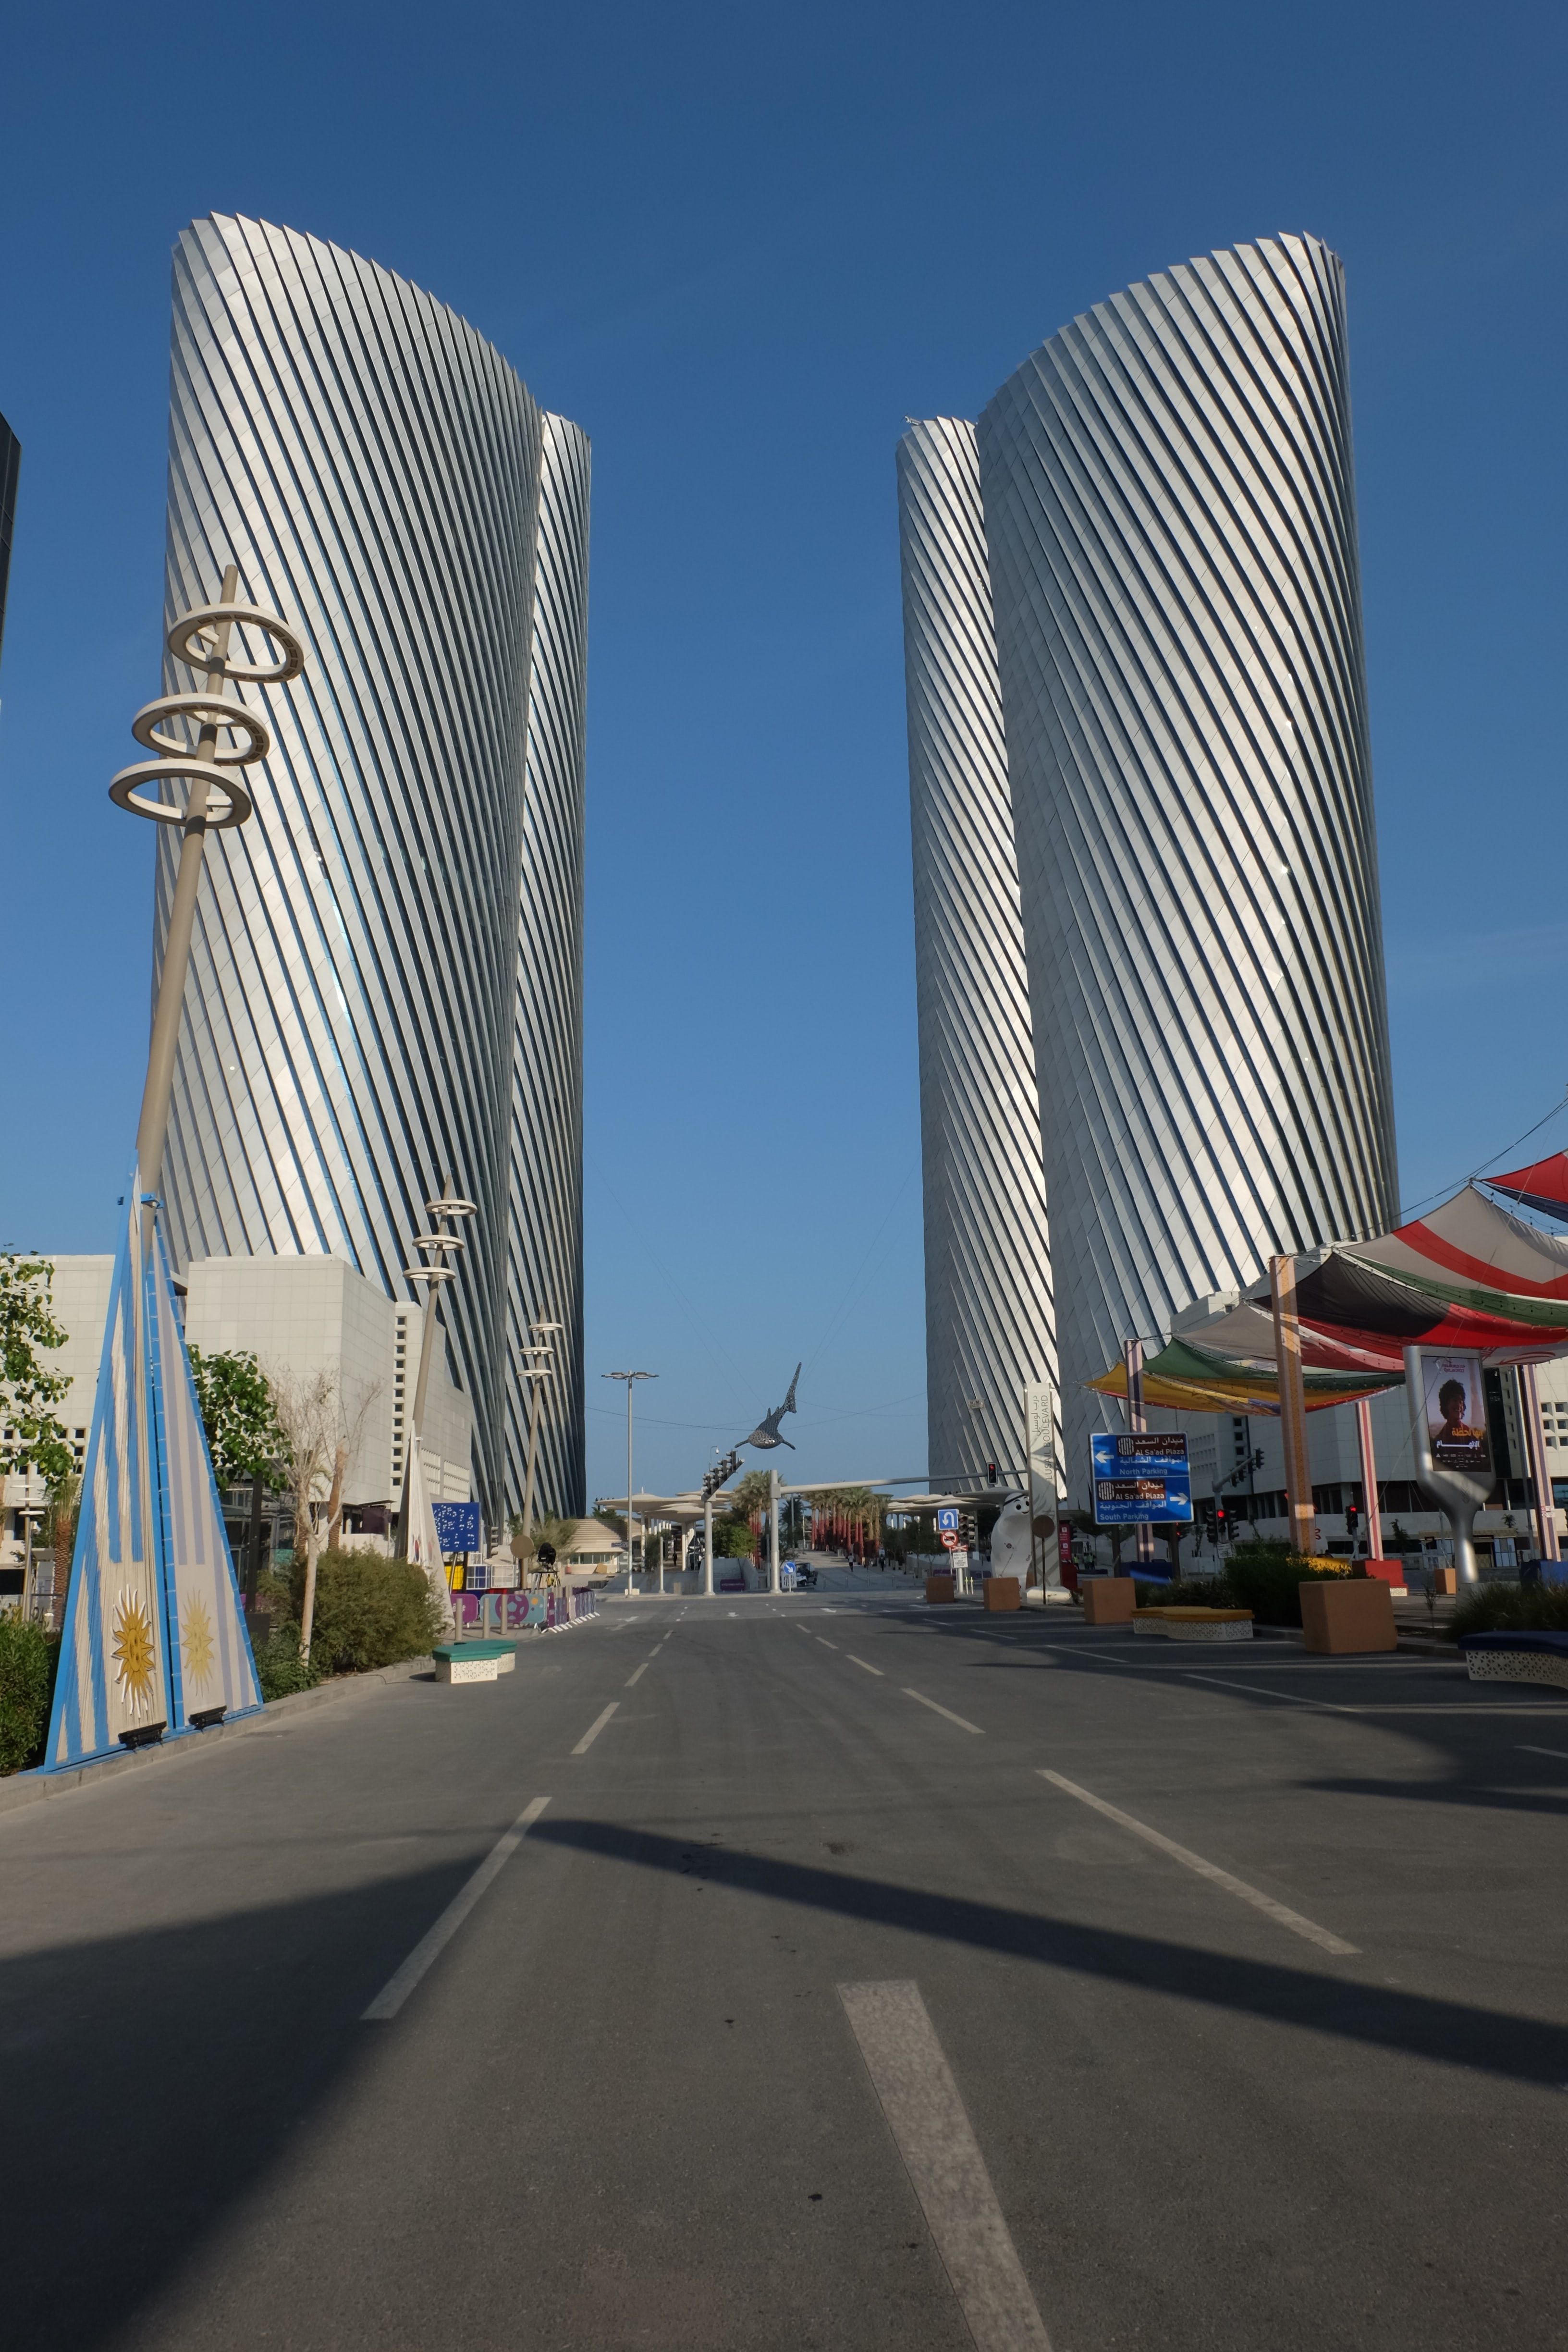 Lusail Boulevard in Qatar with two tall silver towers on either side of the road, against a blue sky.